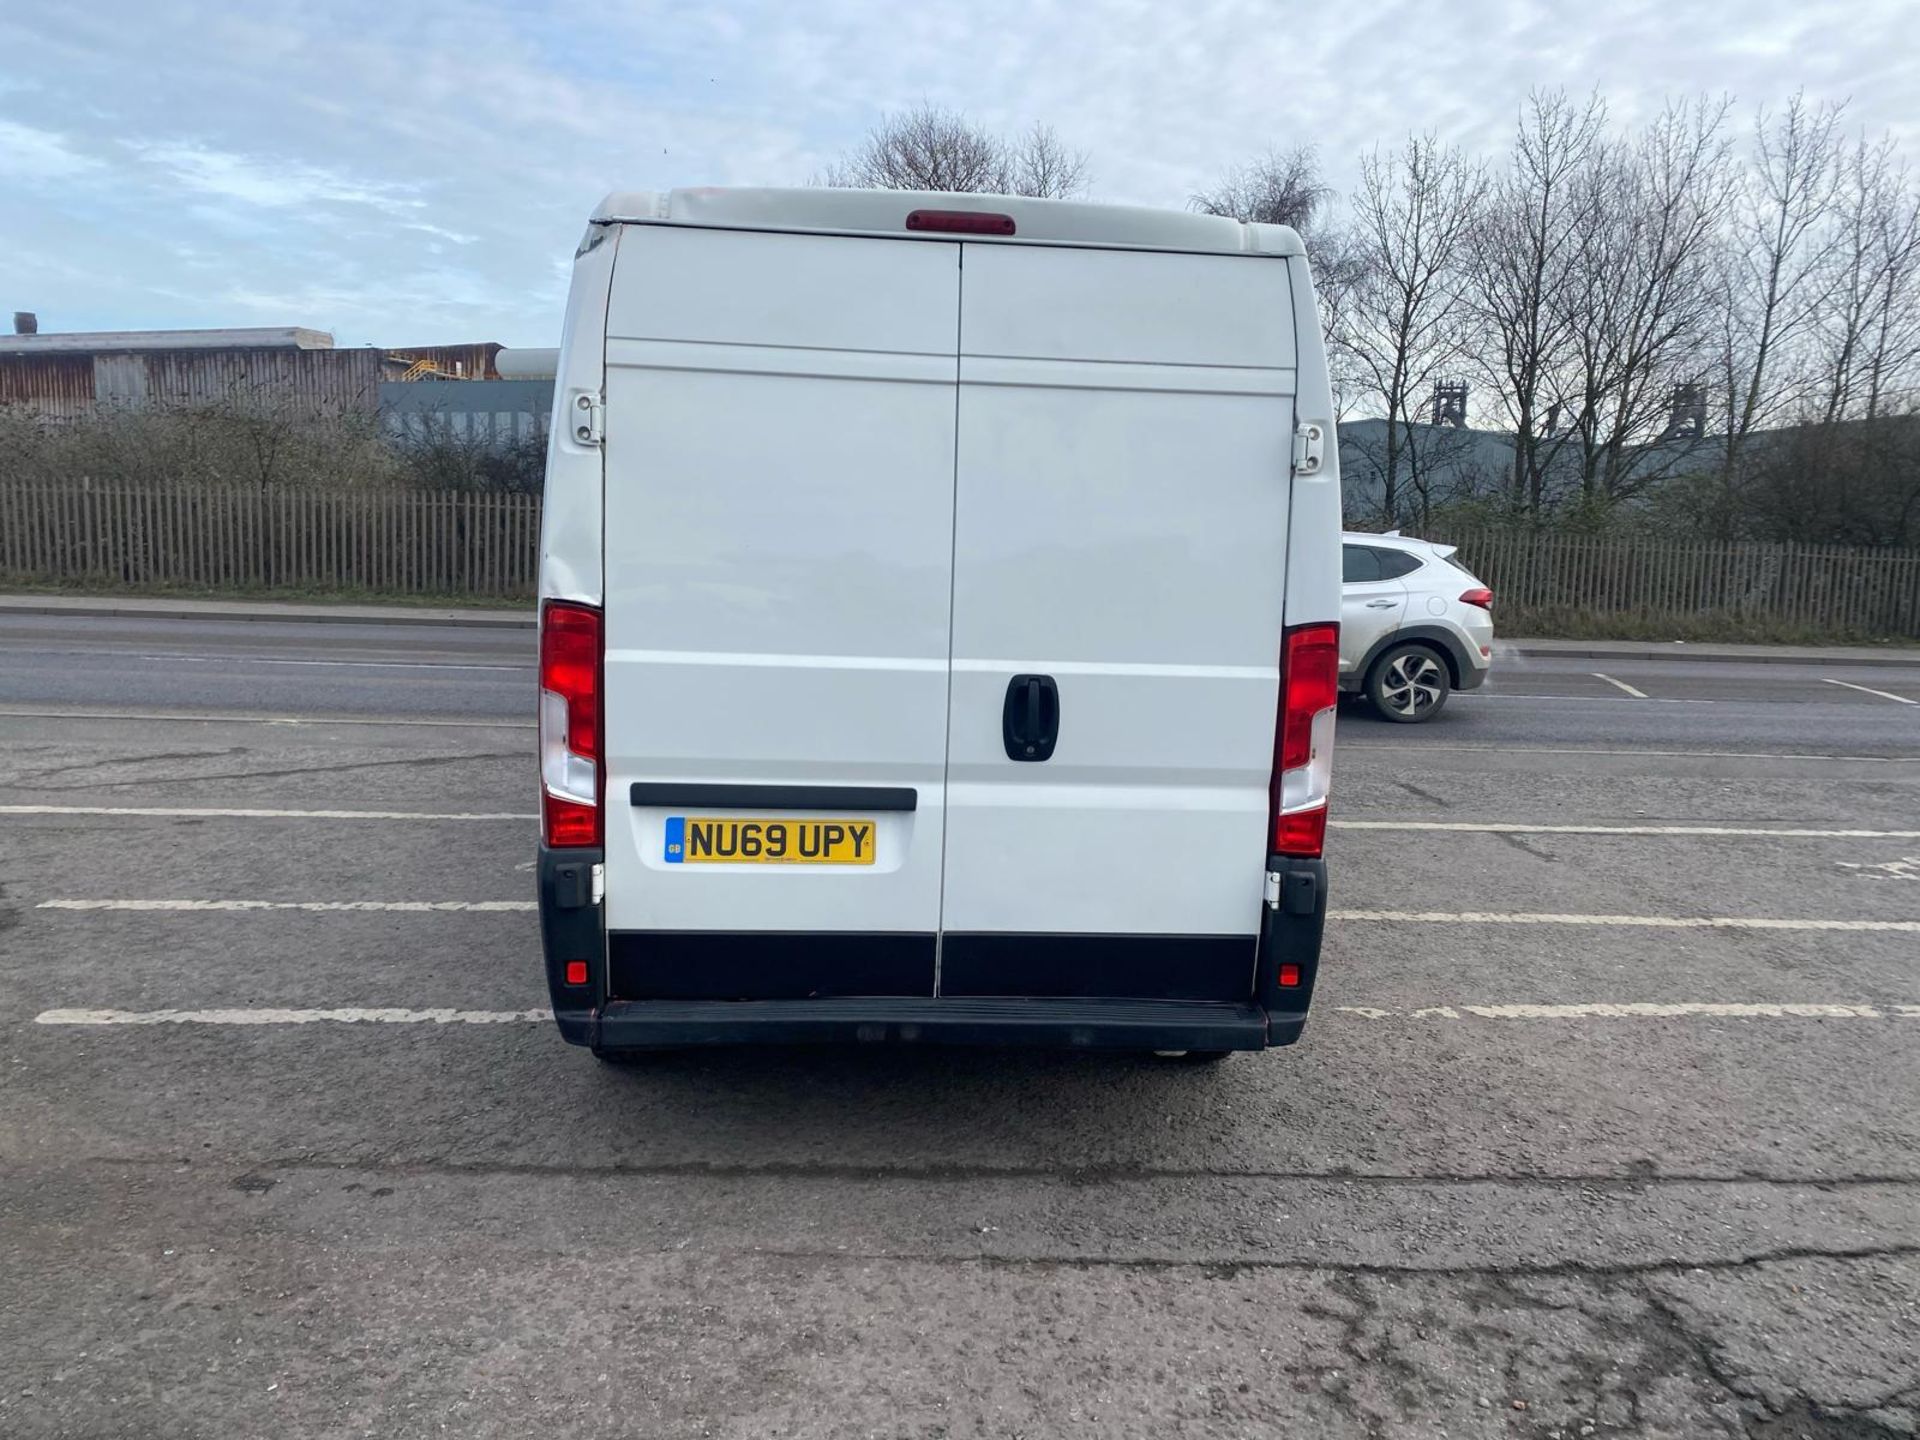 2019 69 PEUGEOT BOXER PANEL VAN - 57K MILES - EURO 6 - PLY LINED. - Image 8 of 12